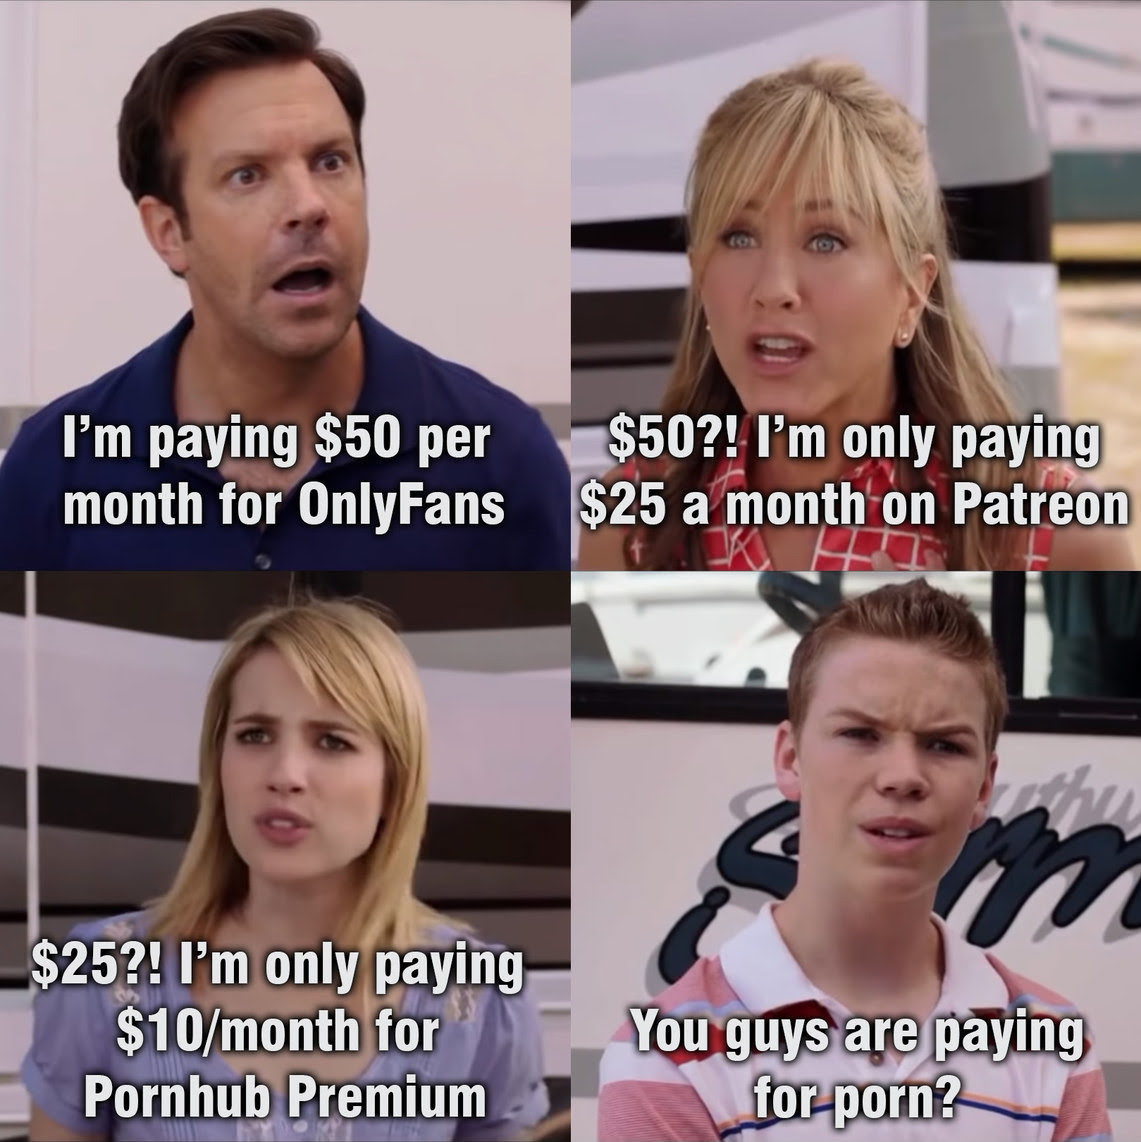 sex memes - no ragrets meme - I'm paying $50 per $50?! I'm only paying month for OnlyFans $25 a month on Patreon $25?! I'm only paying $10month for Pornhub Premium You guys are paying for porn?